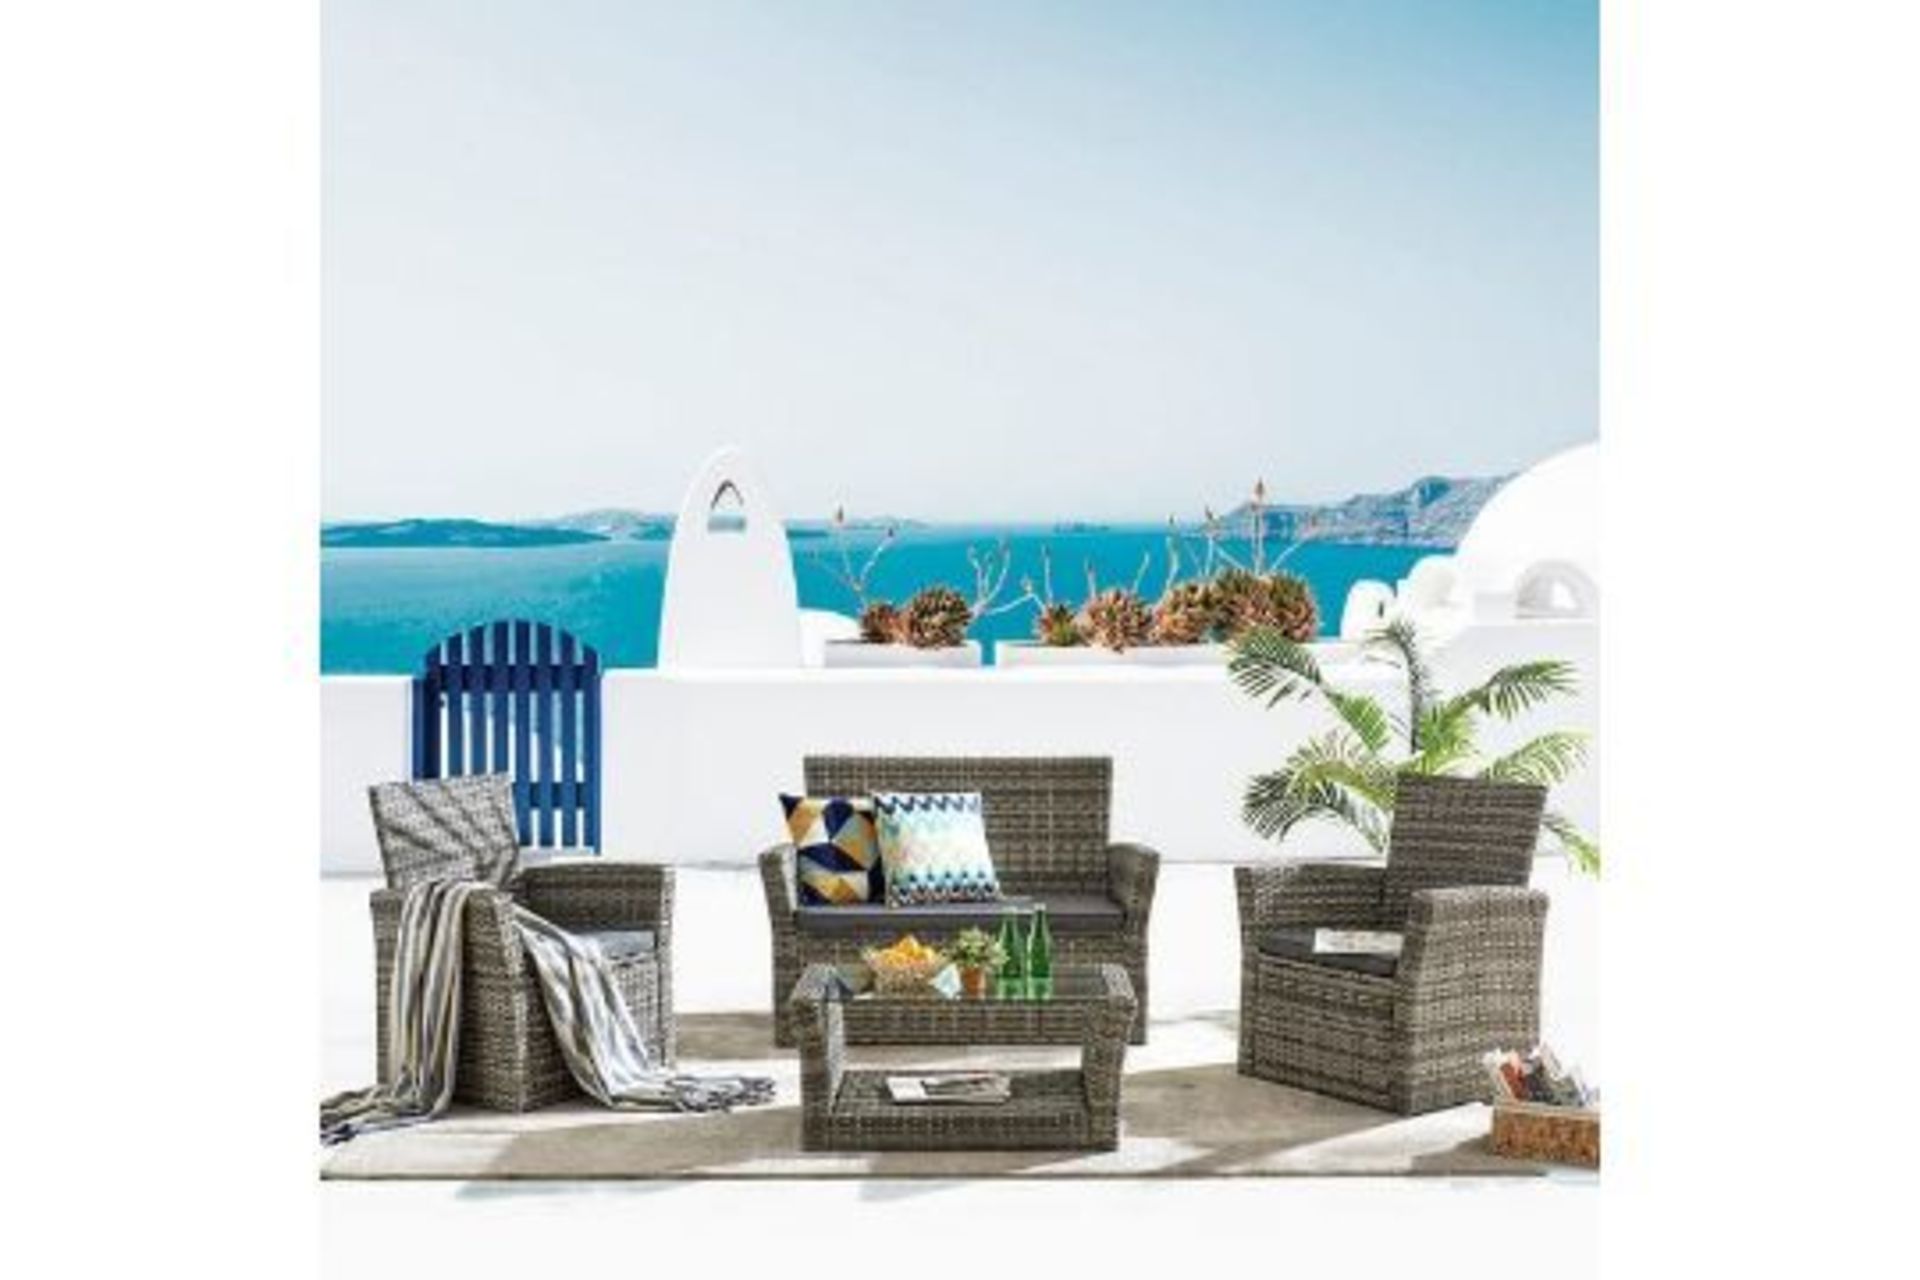 New Boxed Corfo 4 Seater Garden Furniture Set in Grey. The 4-piece garden furniture set includes a